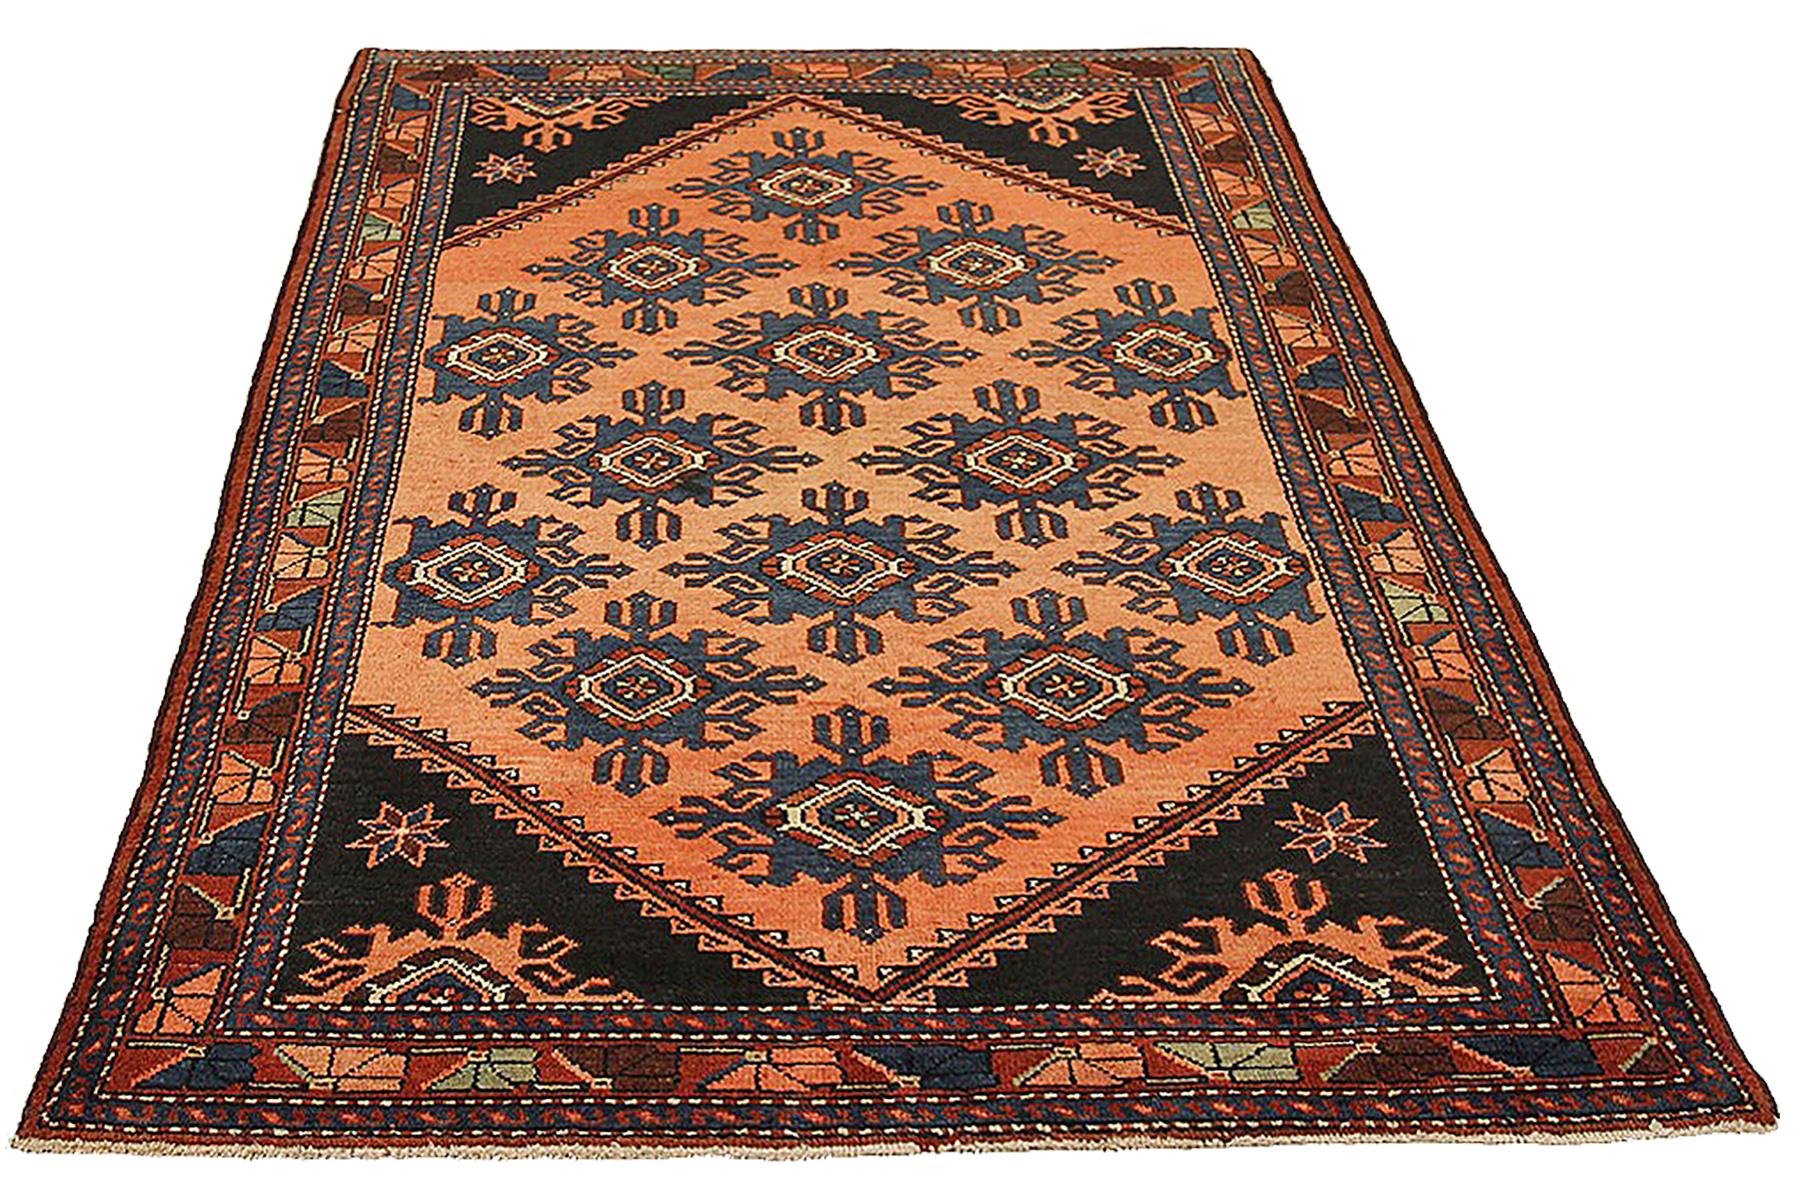 Antique Persian rug handwoven from the finest sheep’s wool and colored with all-natural vegetable dyes that are safe for humans and pets. It’s a traditional Hamedan design featuring floral patterns in bold colors of brown and navy over a black